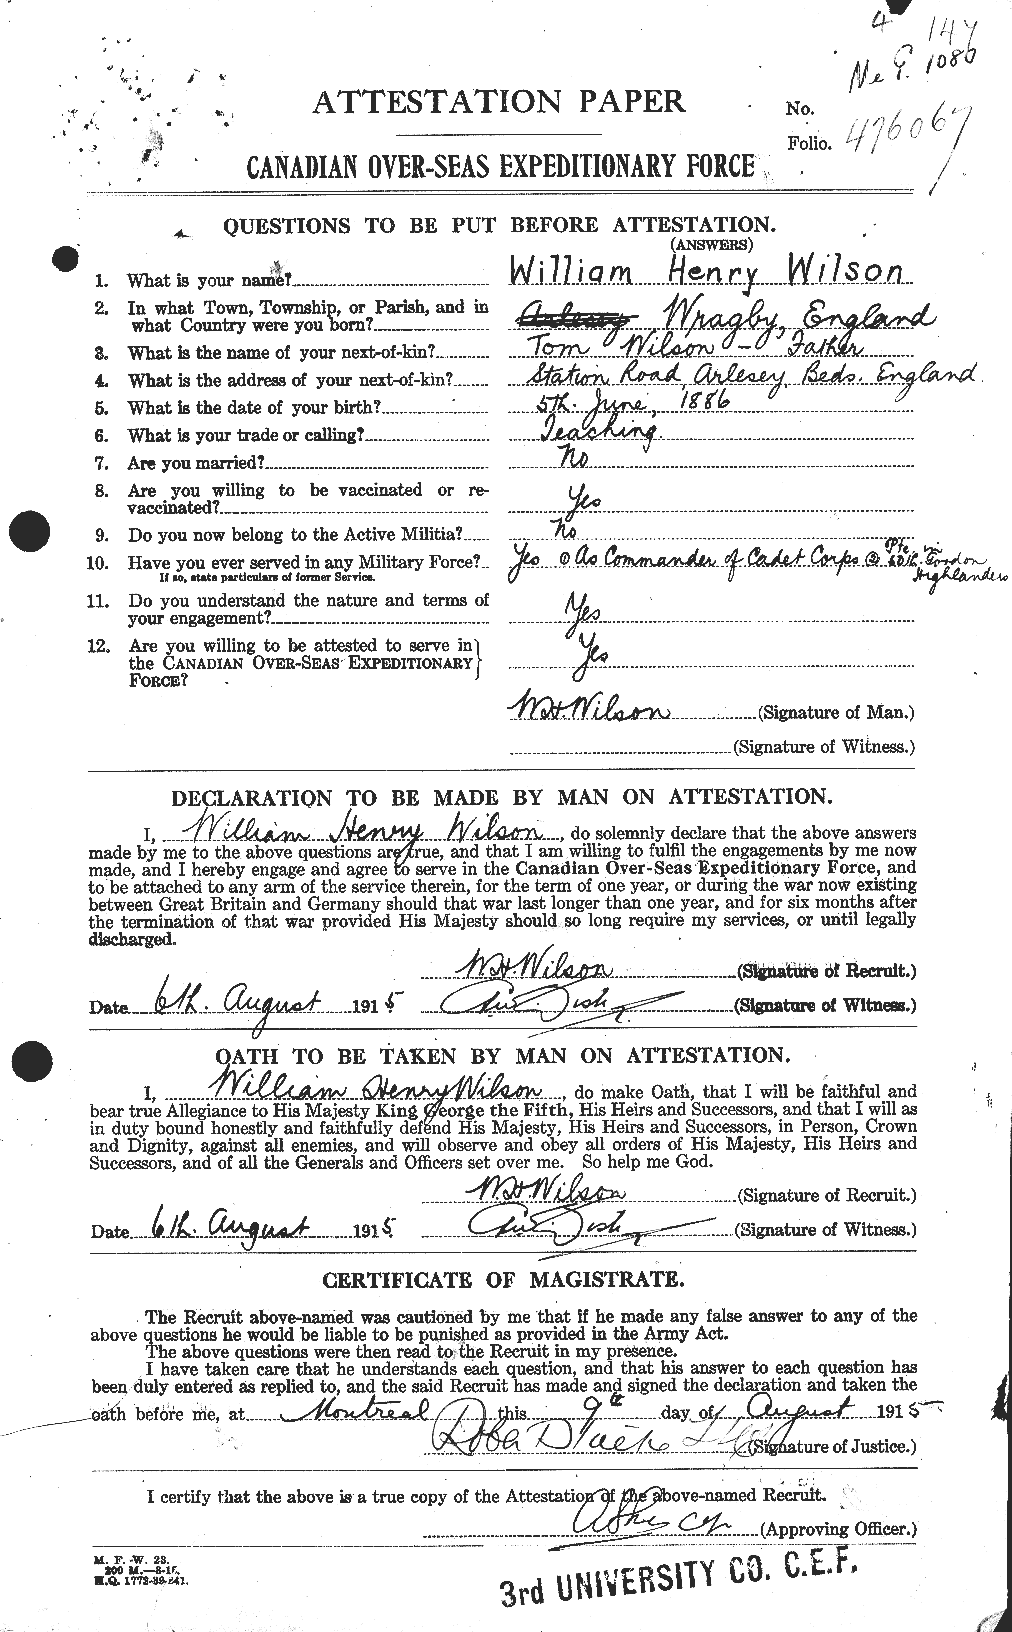 Personnel Records of the First World War - CEF 682028a